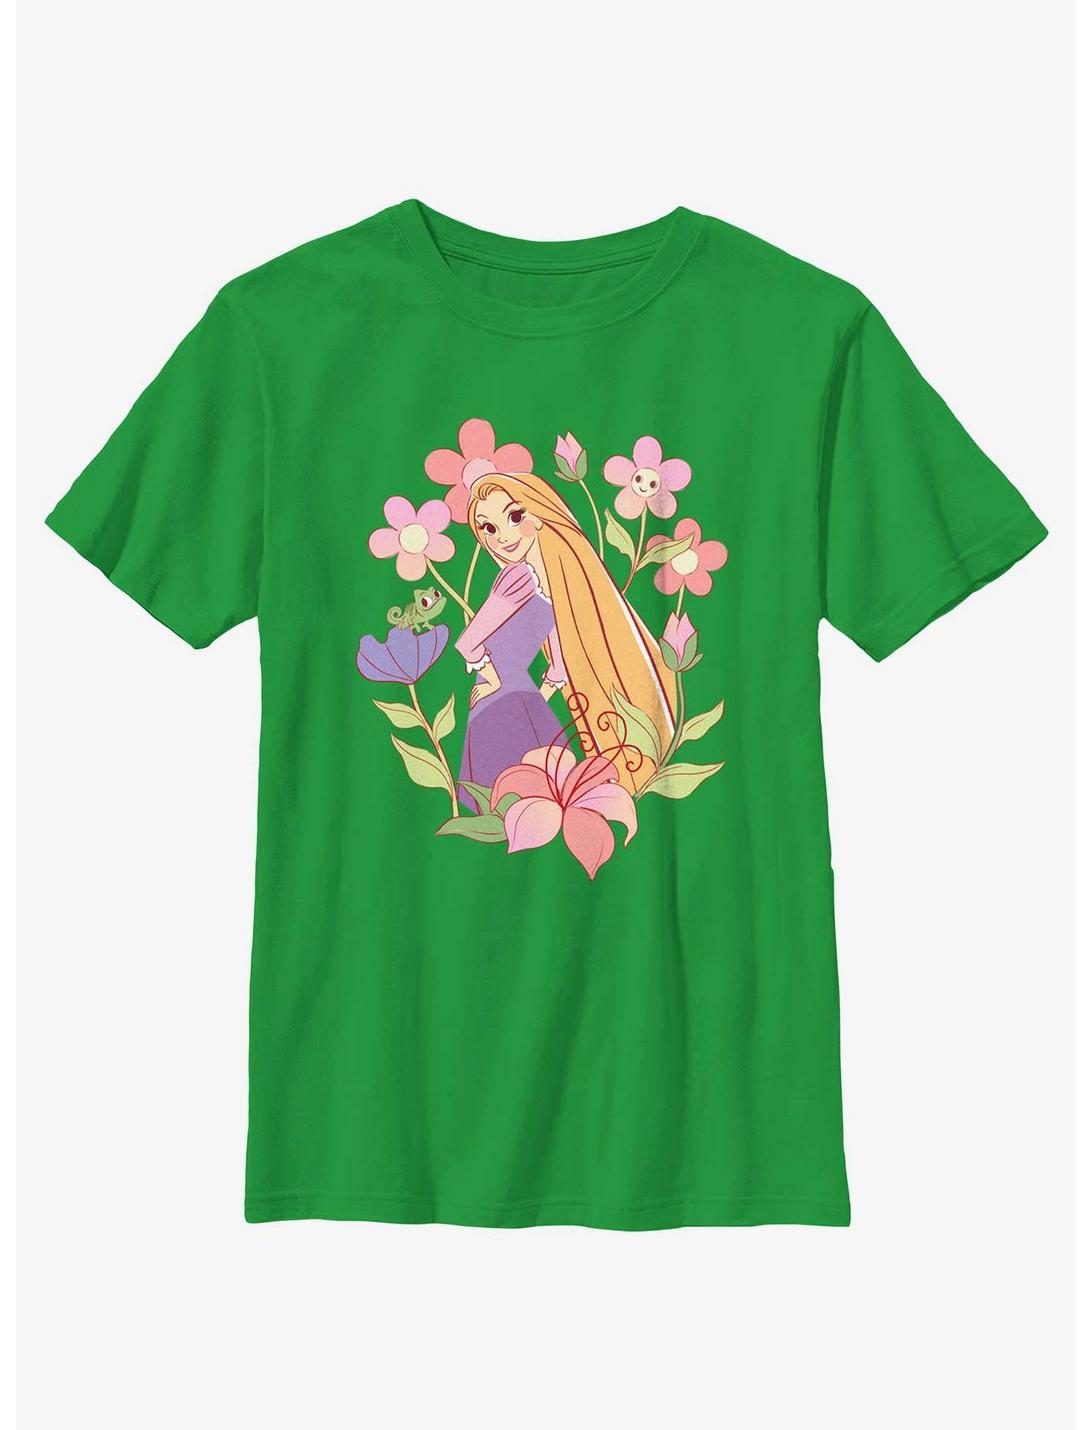 Disney Princesses Rapunzel And Pascal With Flowers Youth T-Shirt, KELLY, hi-res